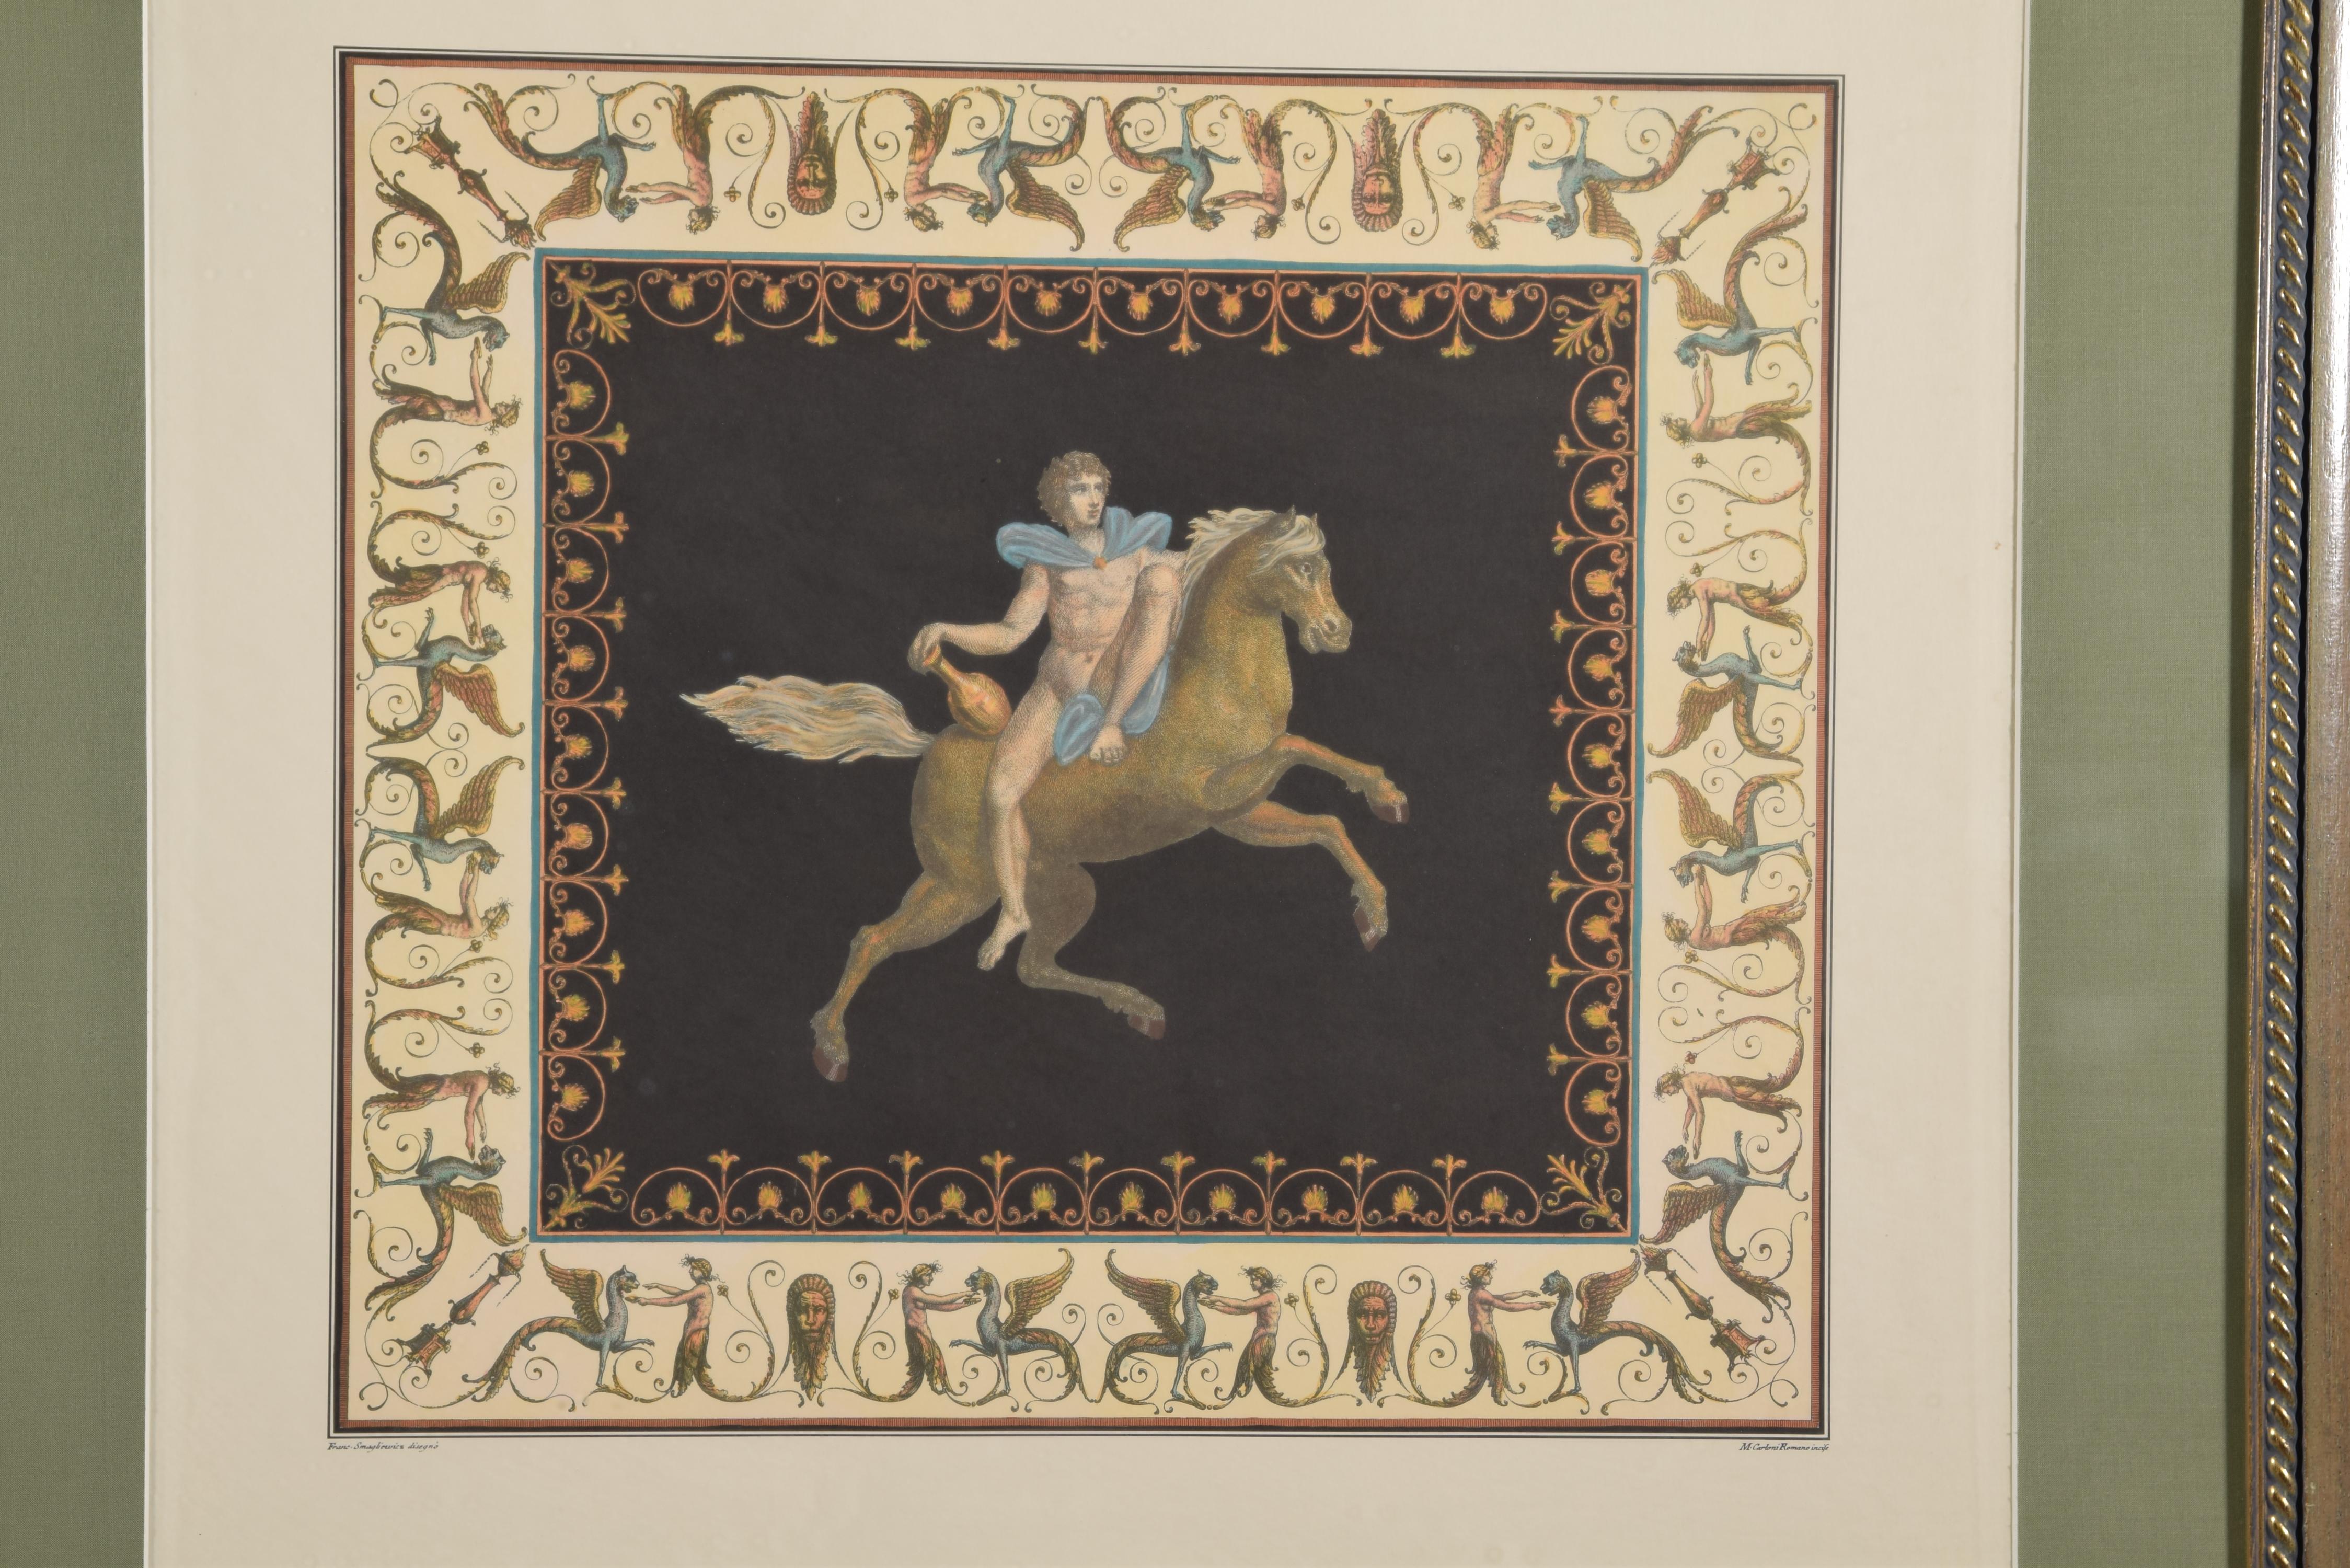 Framed lithograph, fresco from Nero's Domus Aurea (Rome). Engraved by Carlo Romano, after design by Francesco Smuglewicz
 Painted lithograph showing a grotesque frame with elements and a male figure riding a horse in the center of the composition.